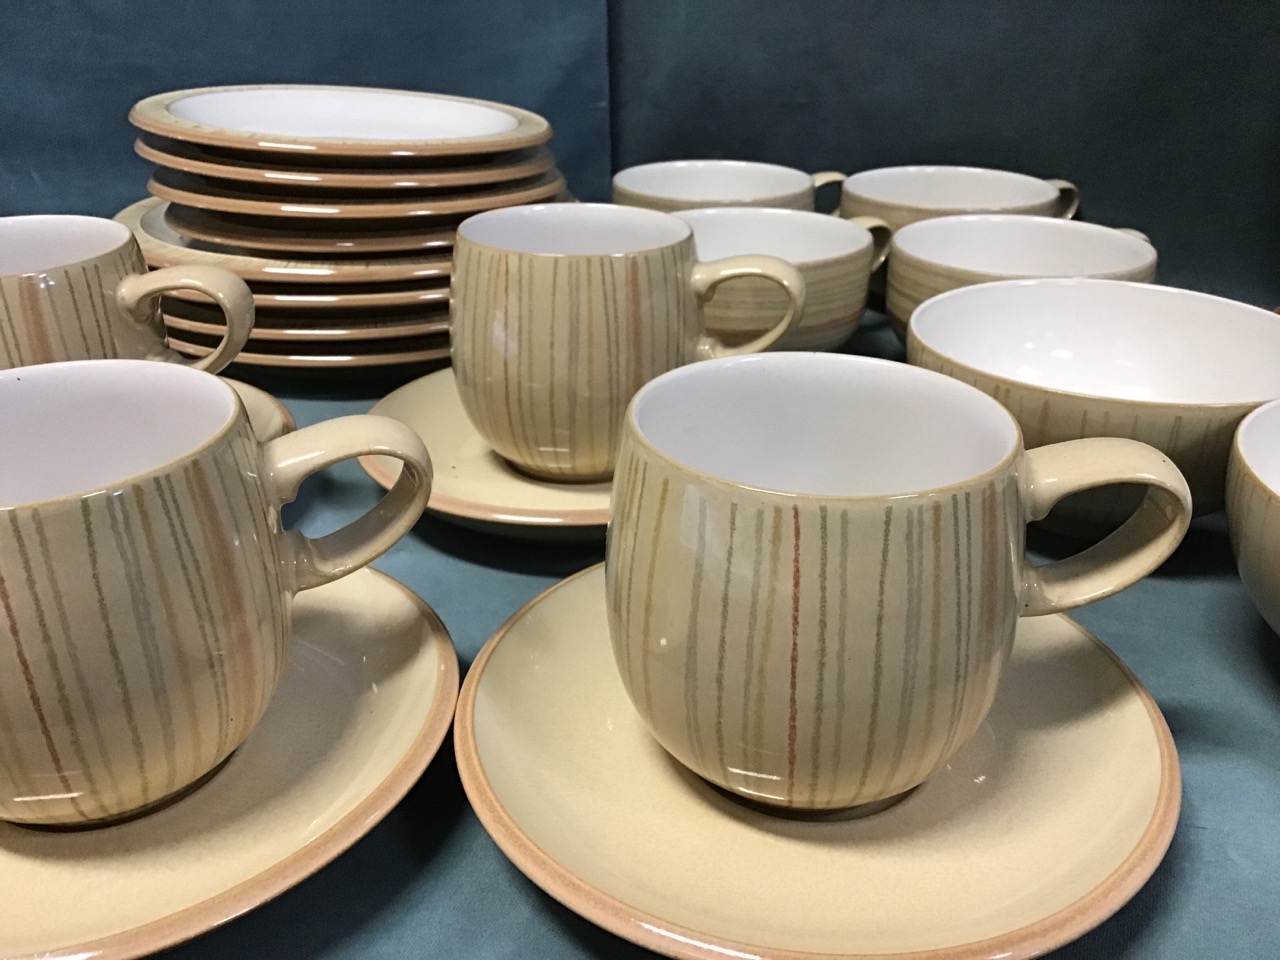 A Denby stoneware Caramel Stripes pattern dinner/tea service with cups & saucers, bowls, plates, - Image 2 of 3